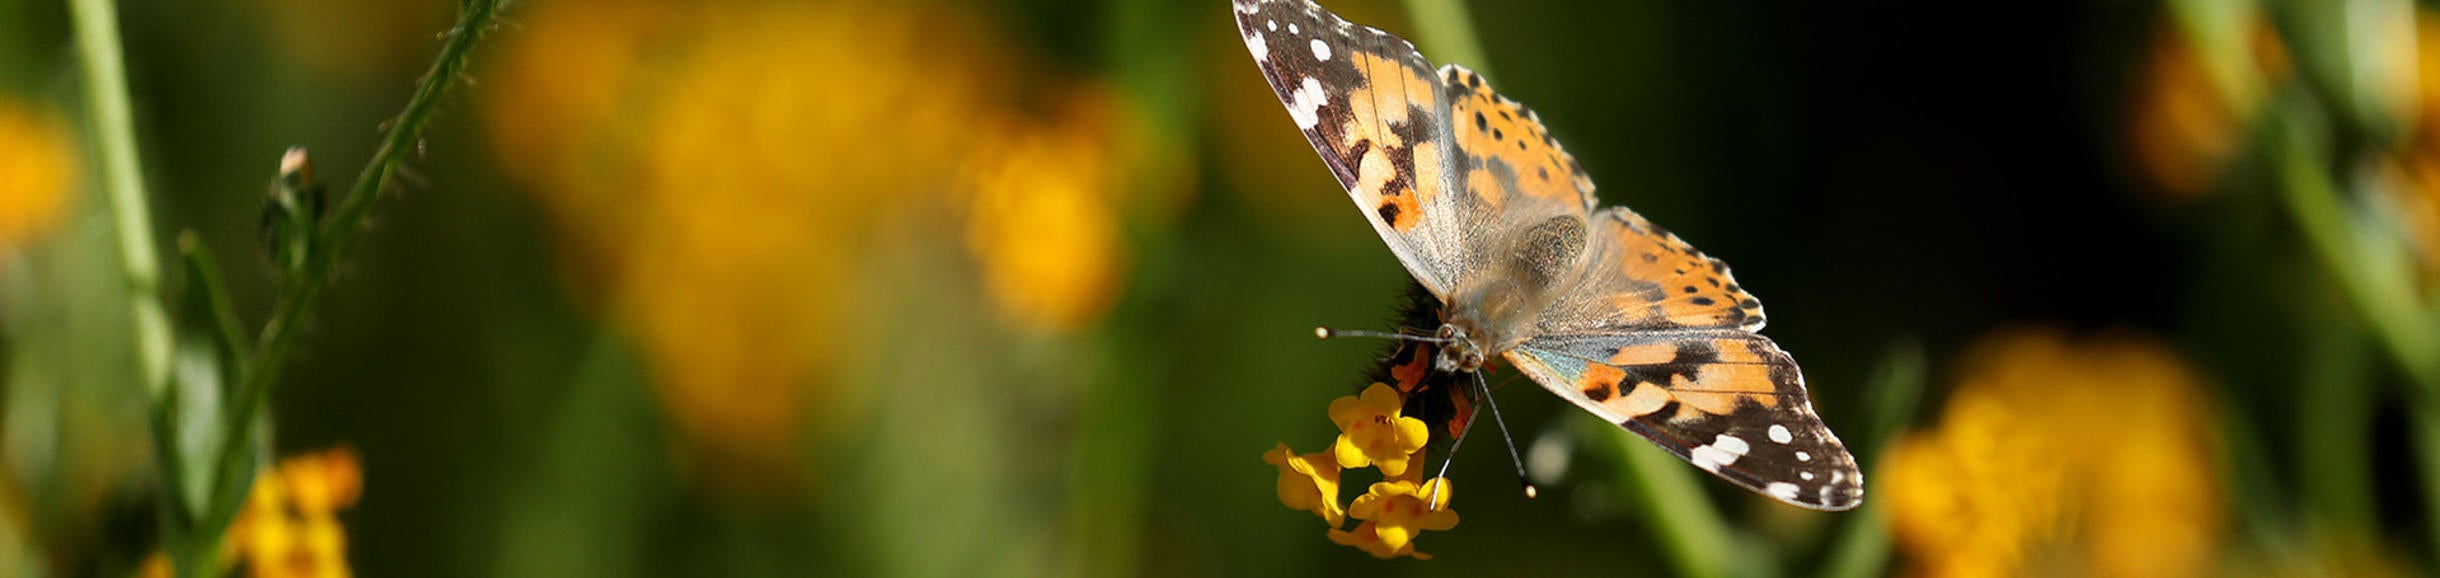 Painted Lady butterfly at Motte Rimrock UCR Natural Reserve (c) UCR / Stan Lim